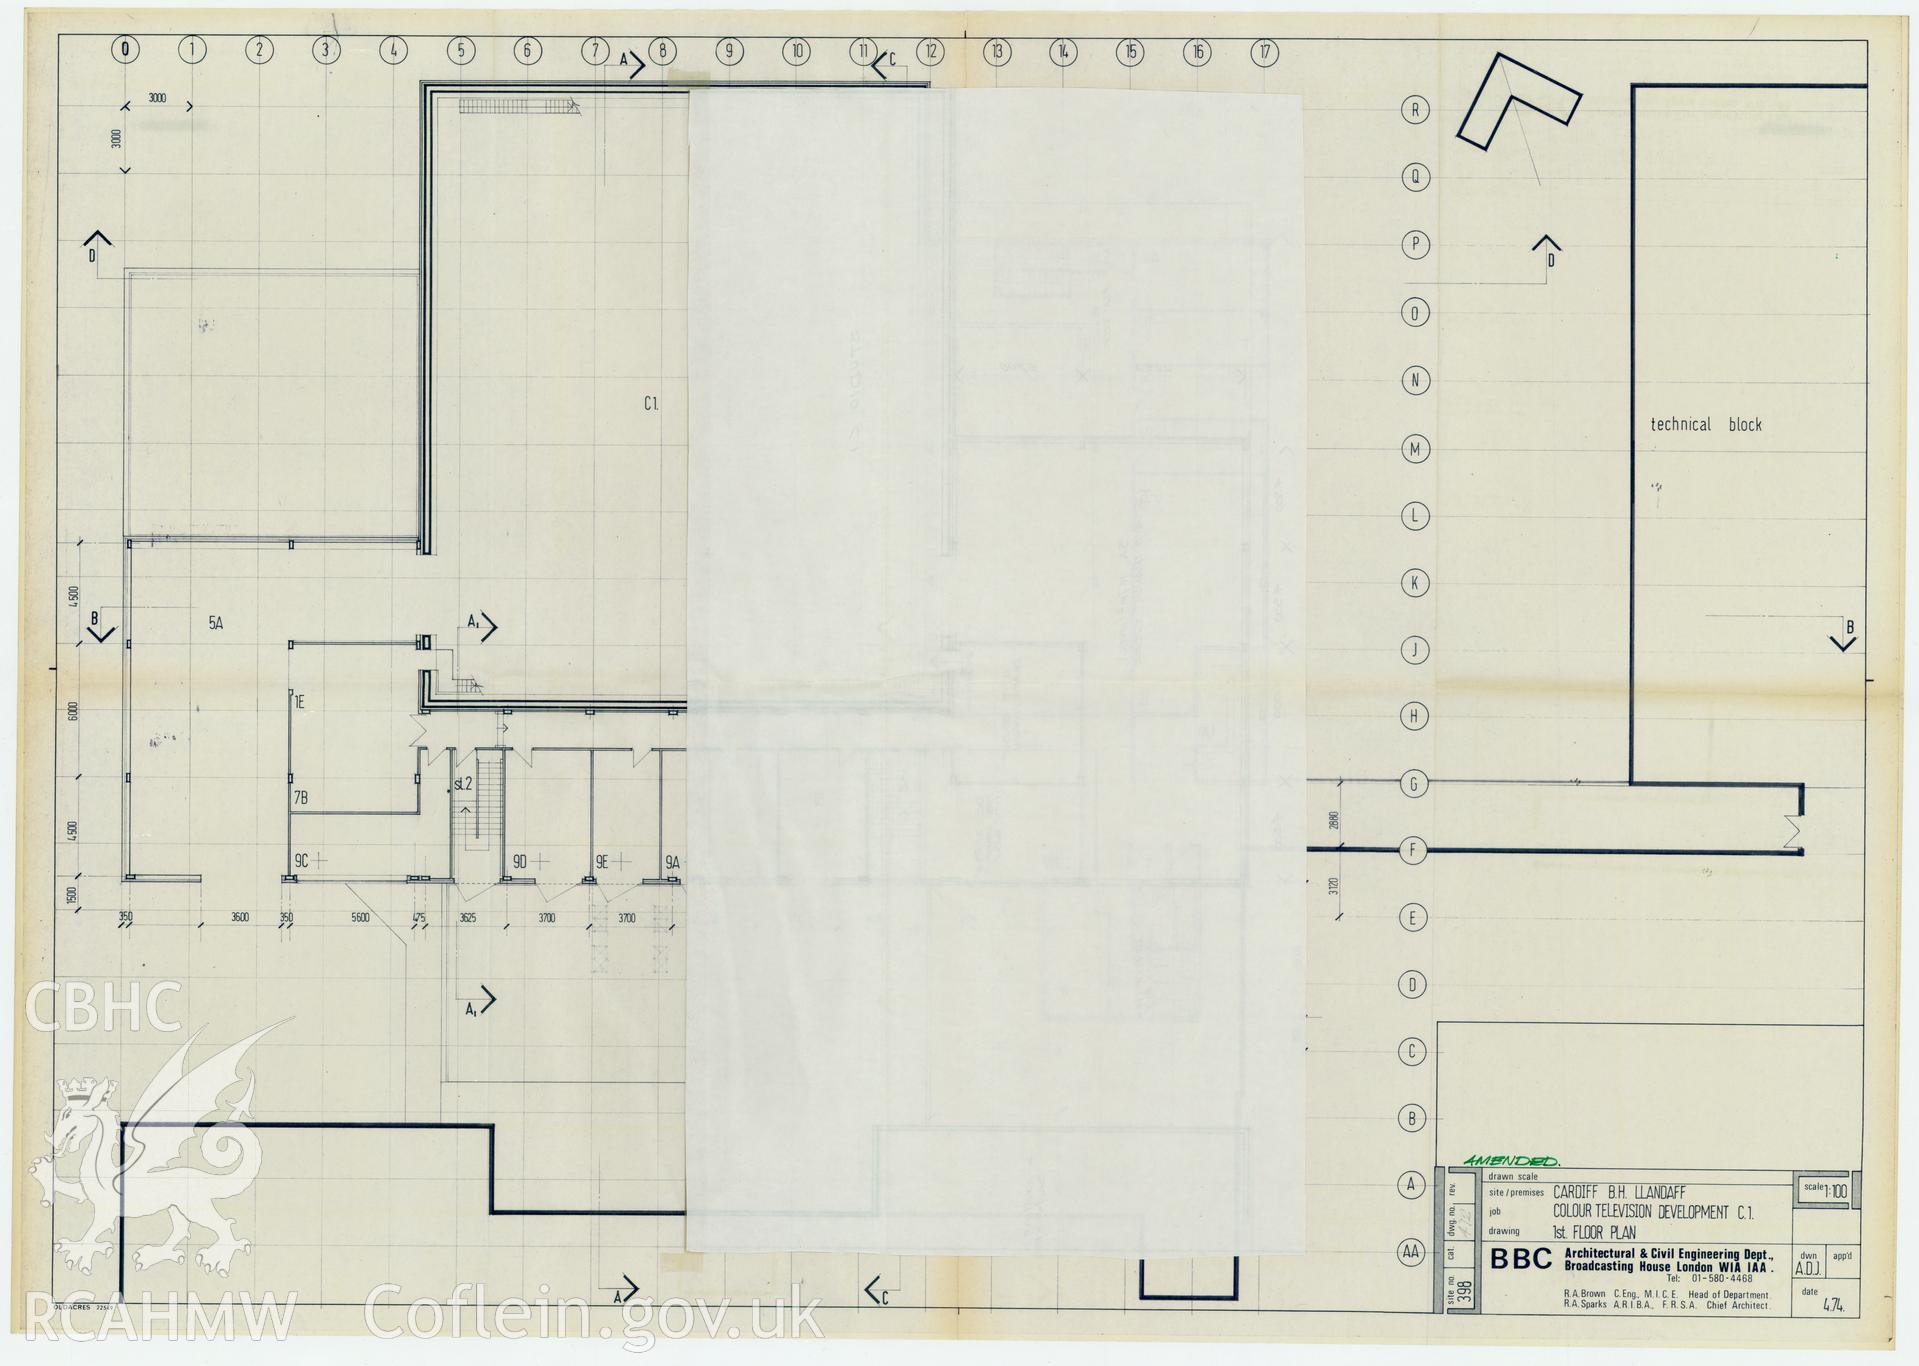 Digitised drawing plan of Llandaff production studio C1 - Colour TV Development, First floor plan. Drawing no. 412c amended. May 1974.